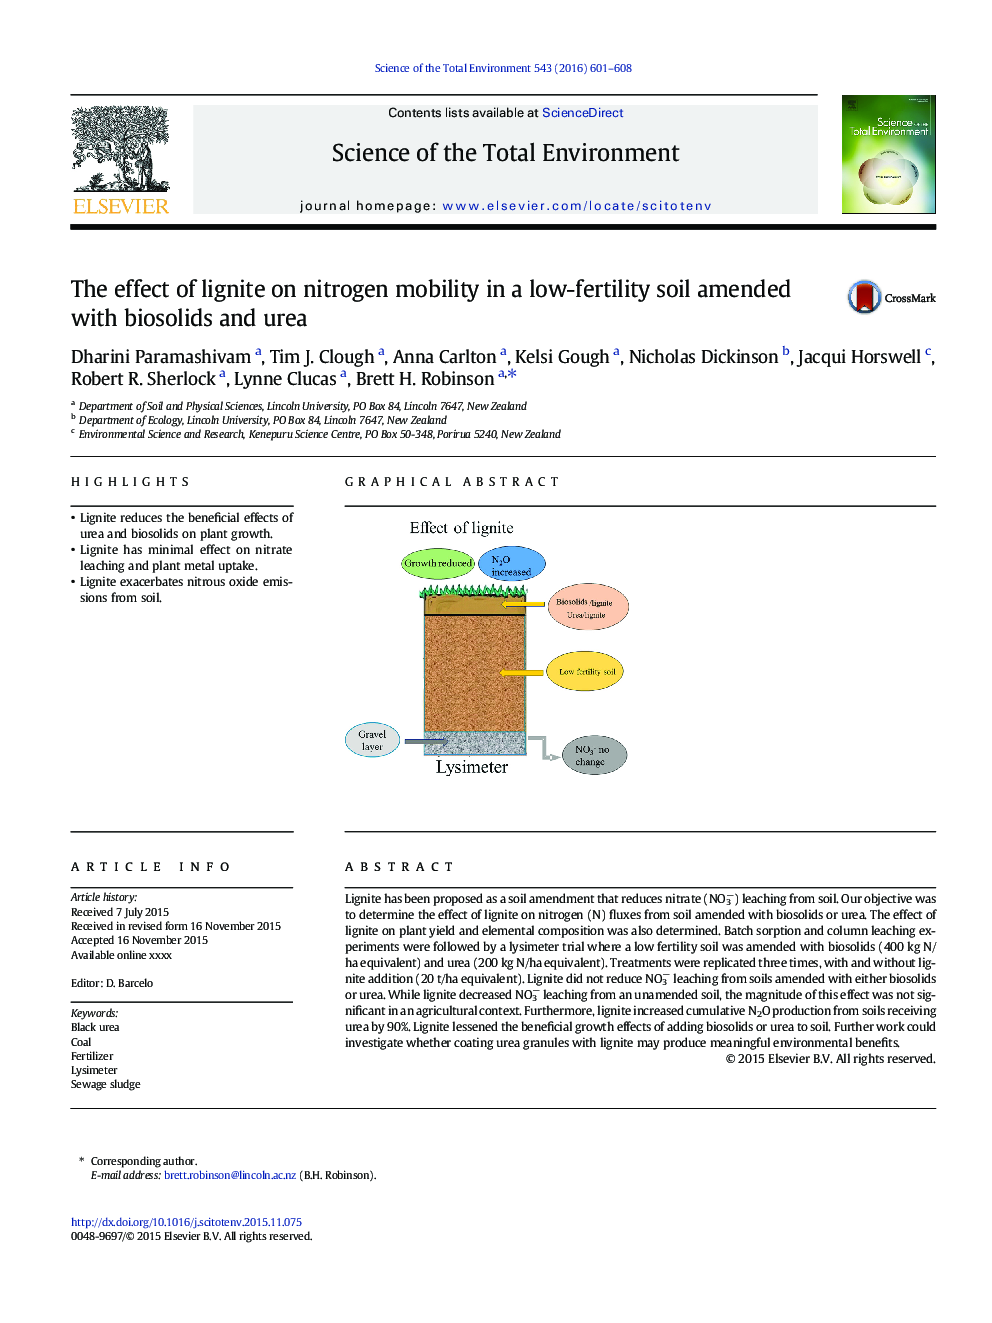 The effect of lignite on nitrogen mobility in a low-fertility soil amended with biosolids and urea